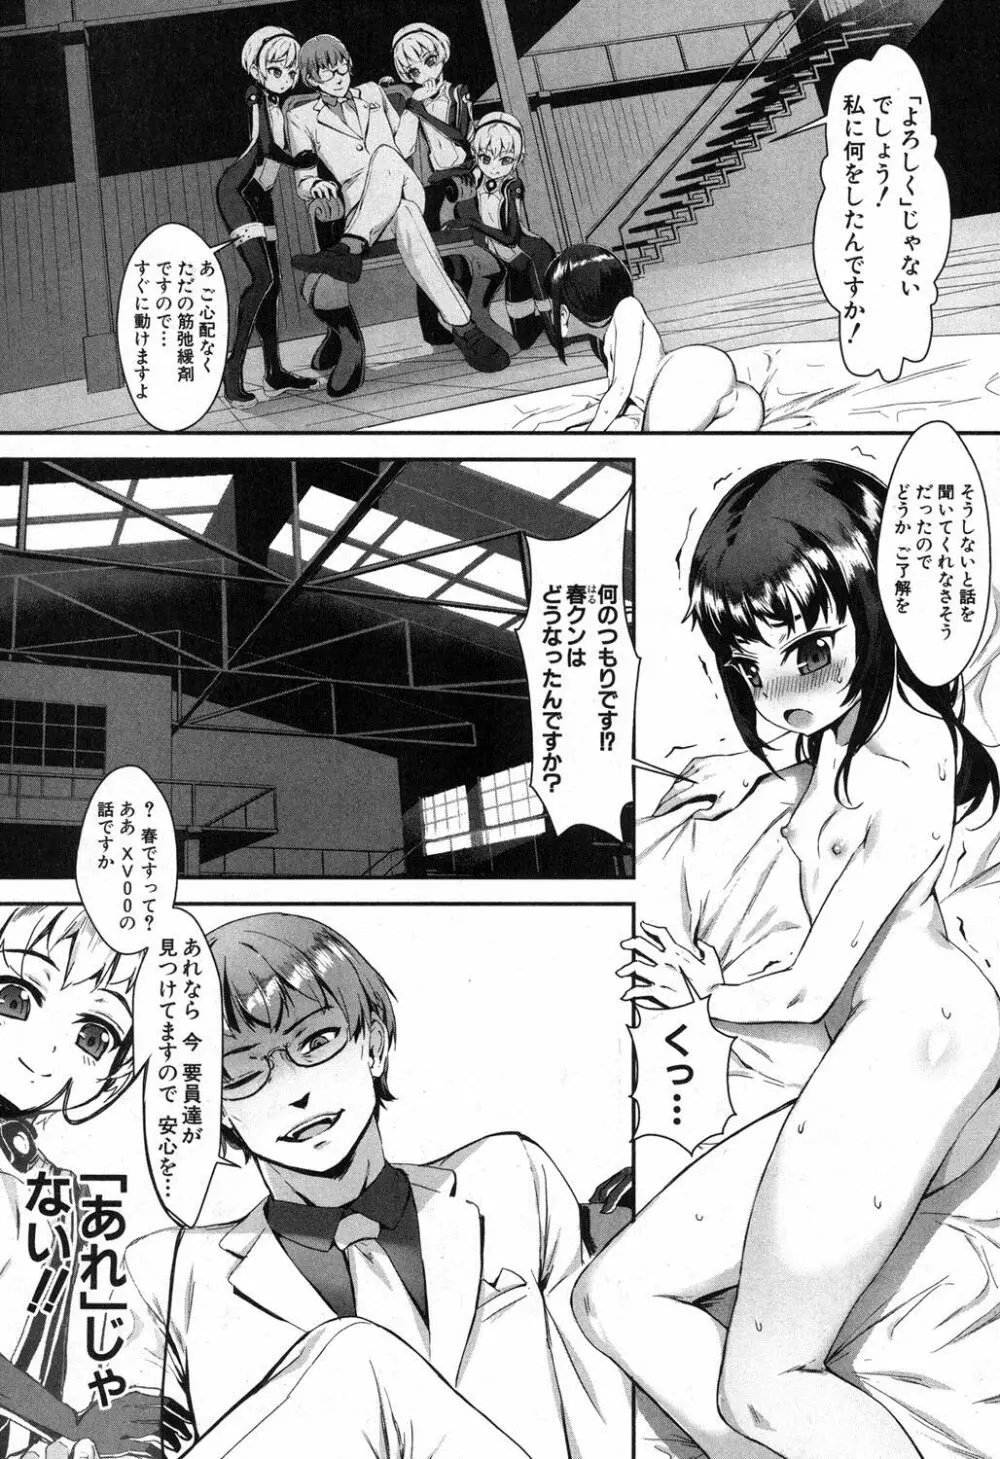 T.F.S 第1-4話 + 御負け PV Page.81